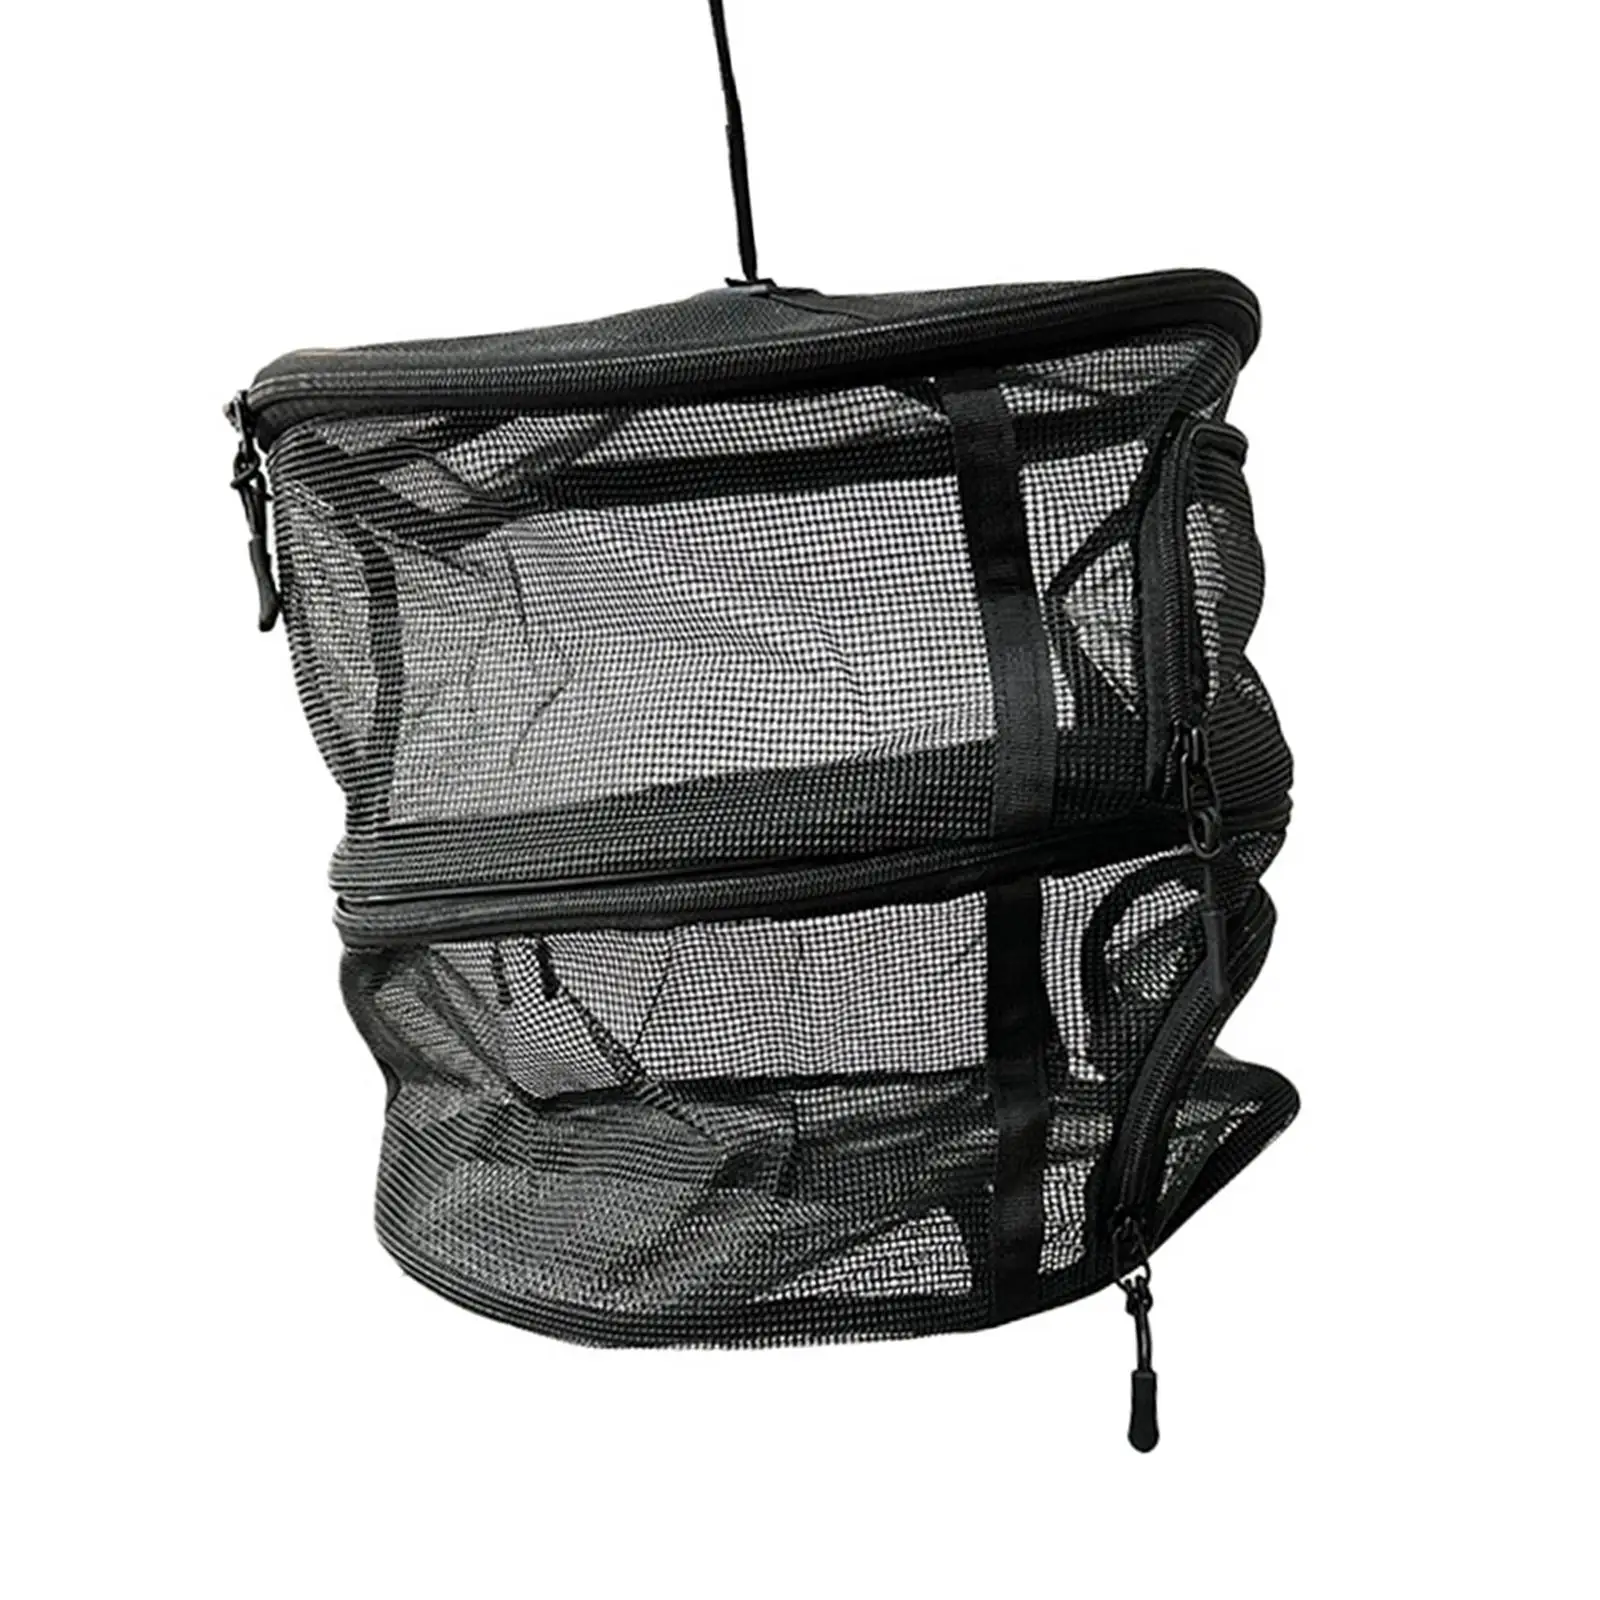 Drying Net Hanging Mesh Drying Rack Hanging Basket for Flowers Buds Plants